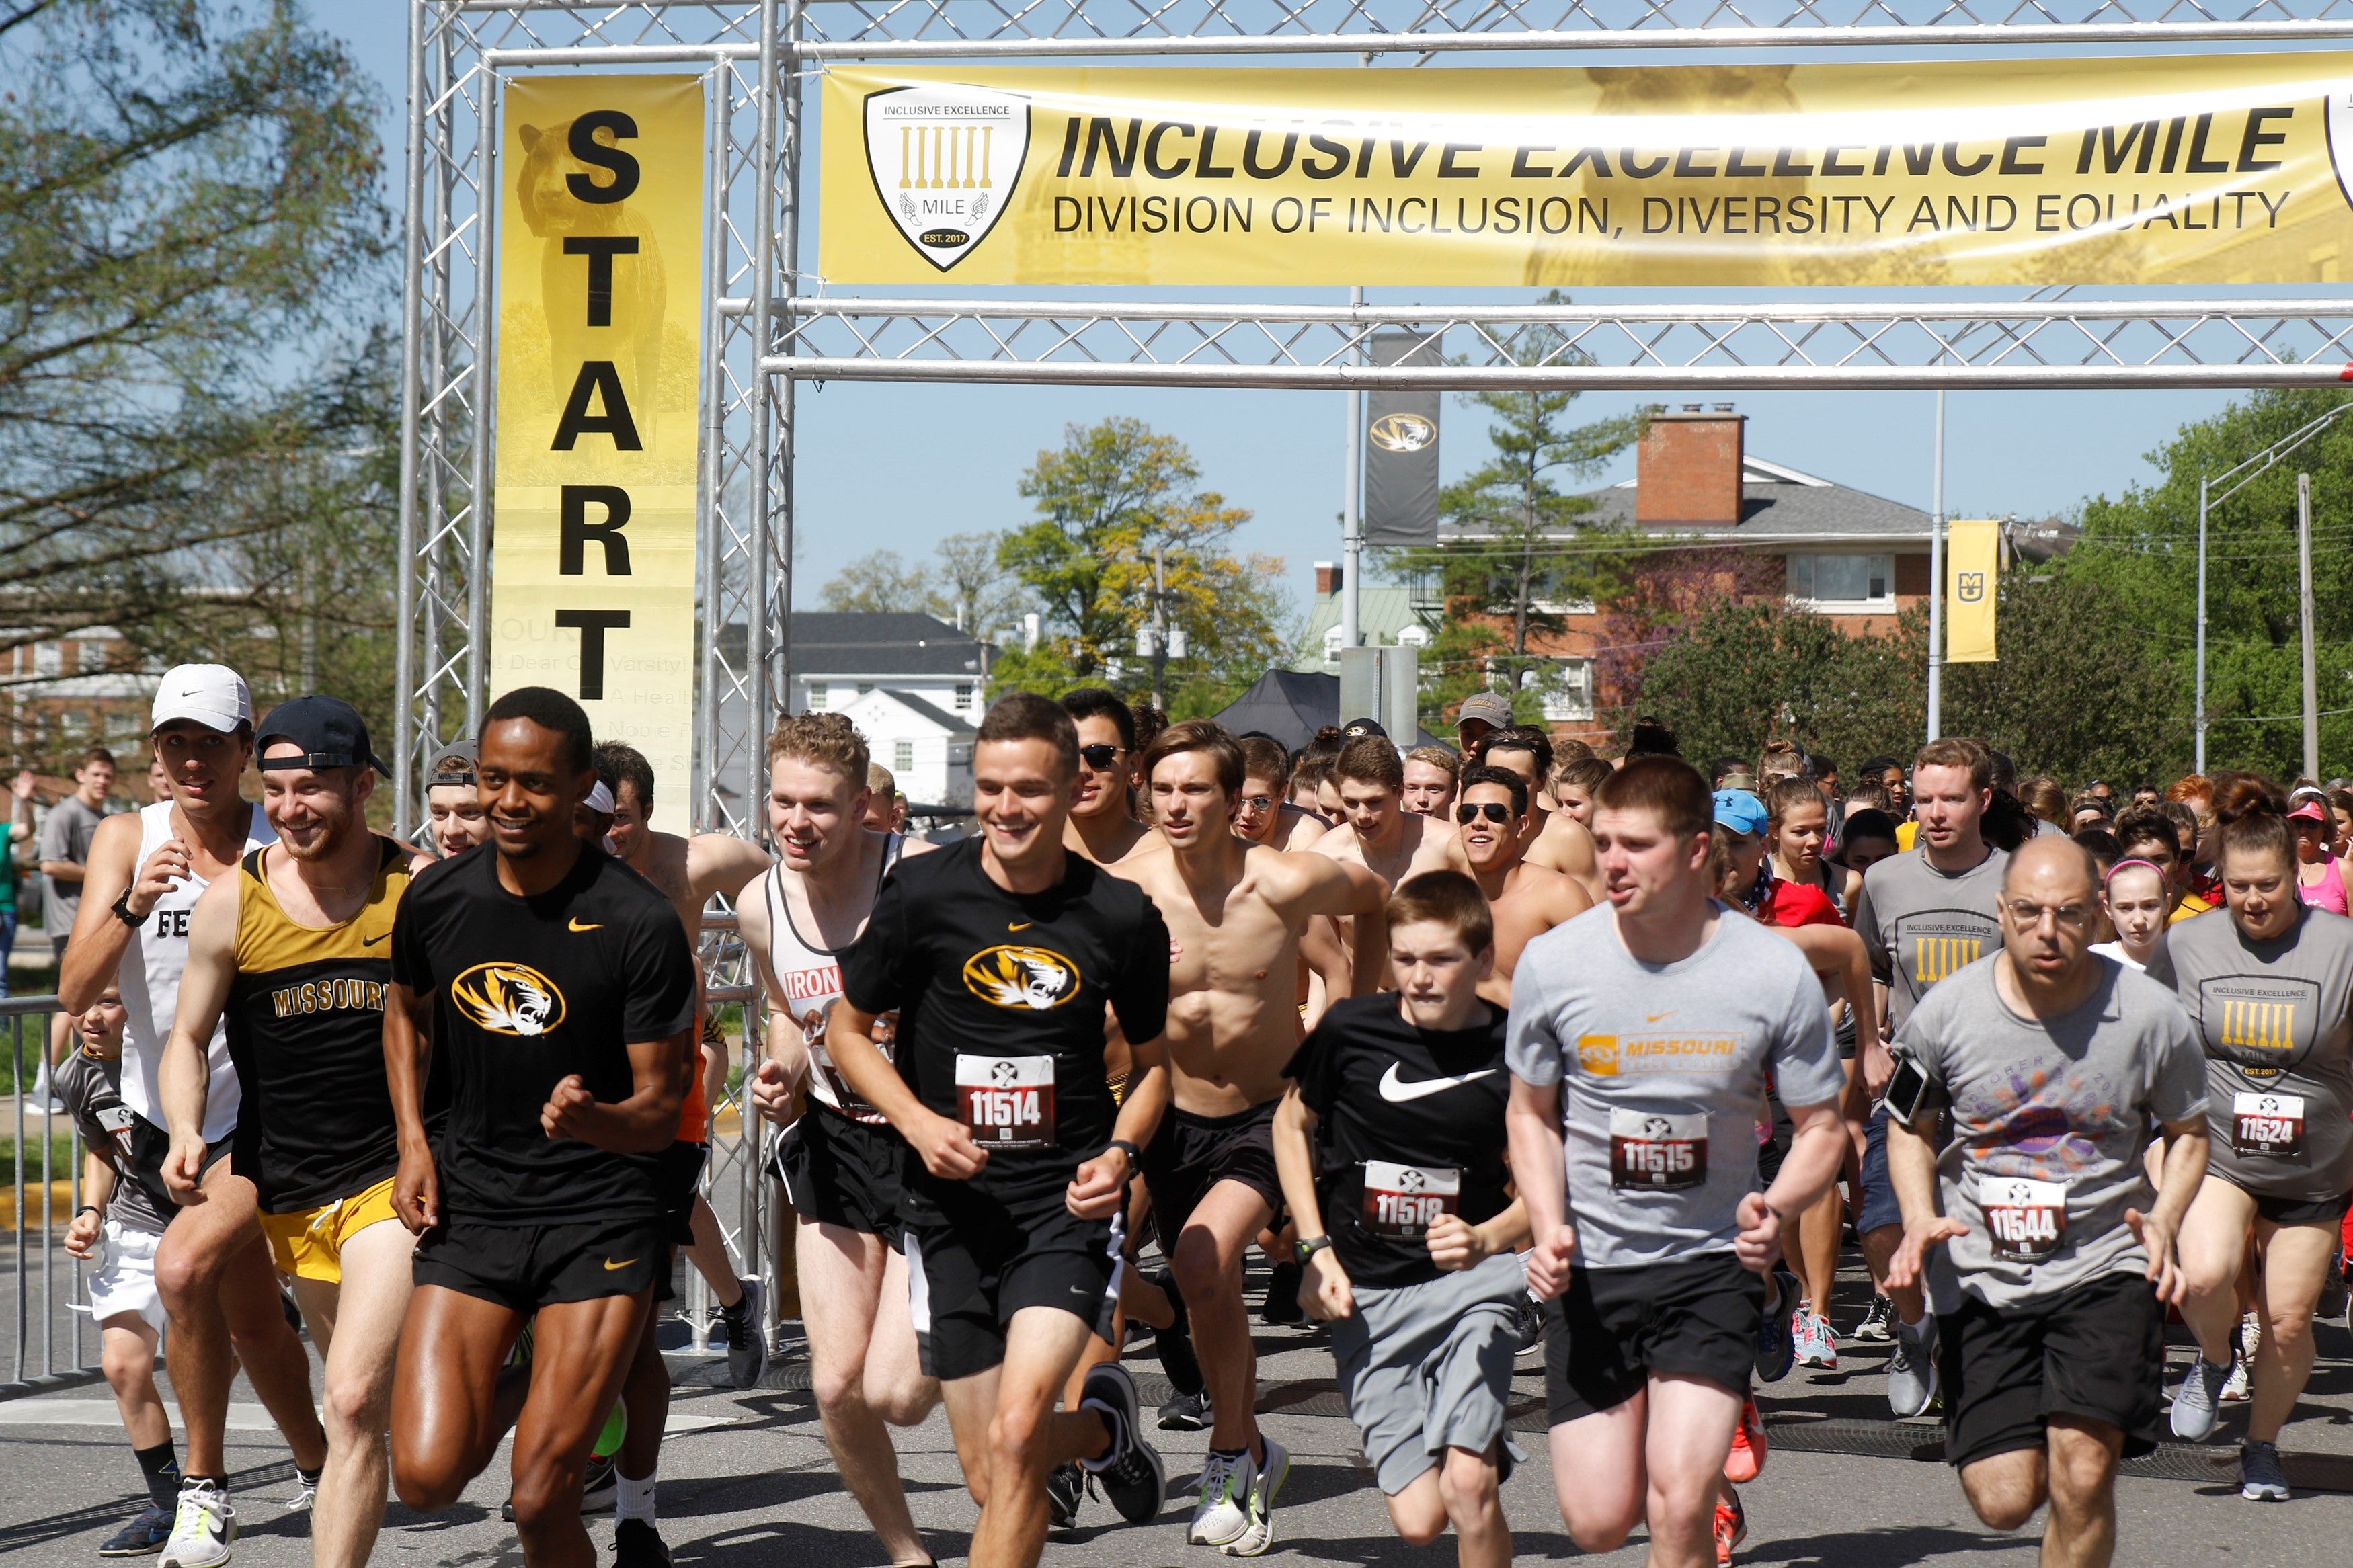 Mizzou Inclusive Excellence Mile Is A Hit In Mid Missouri Community